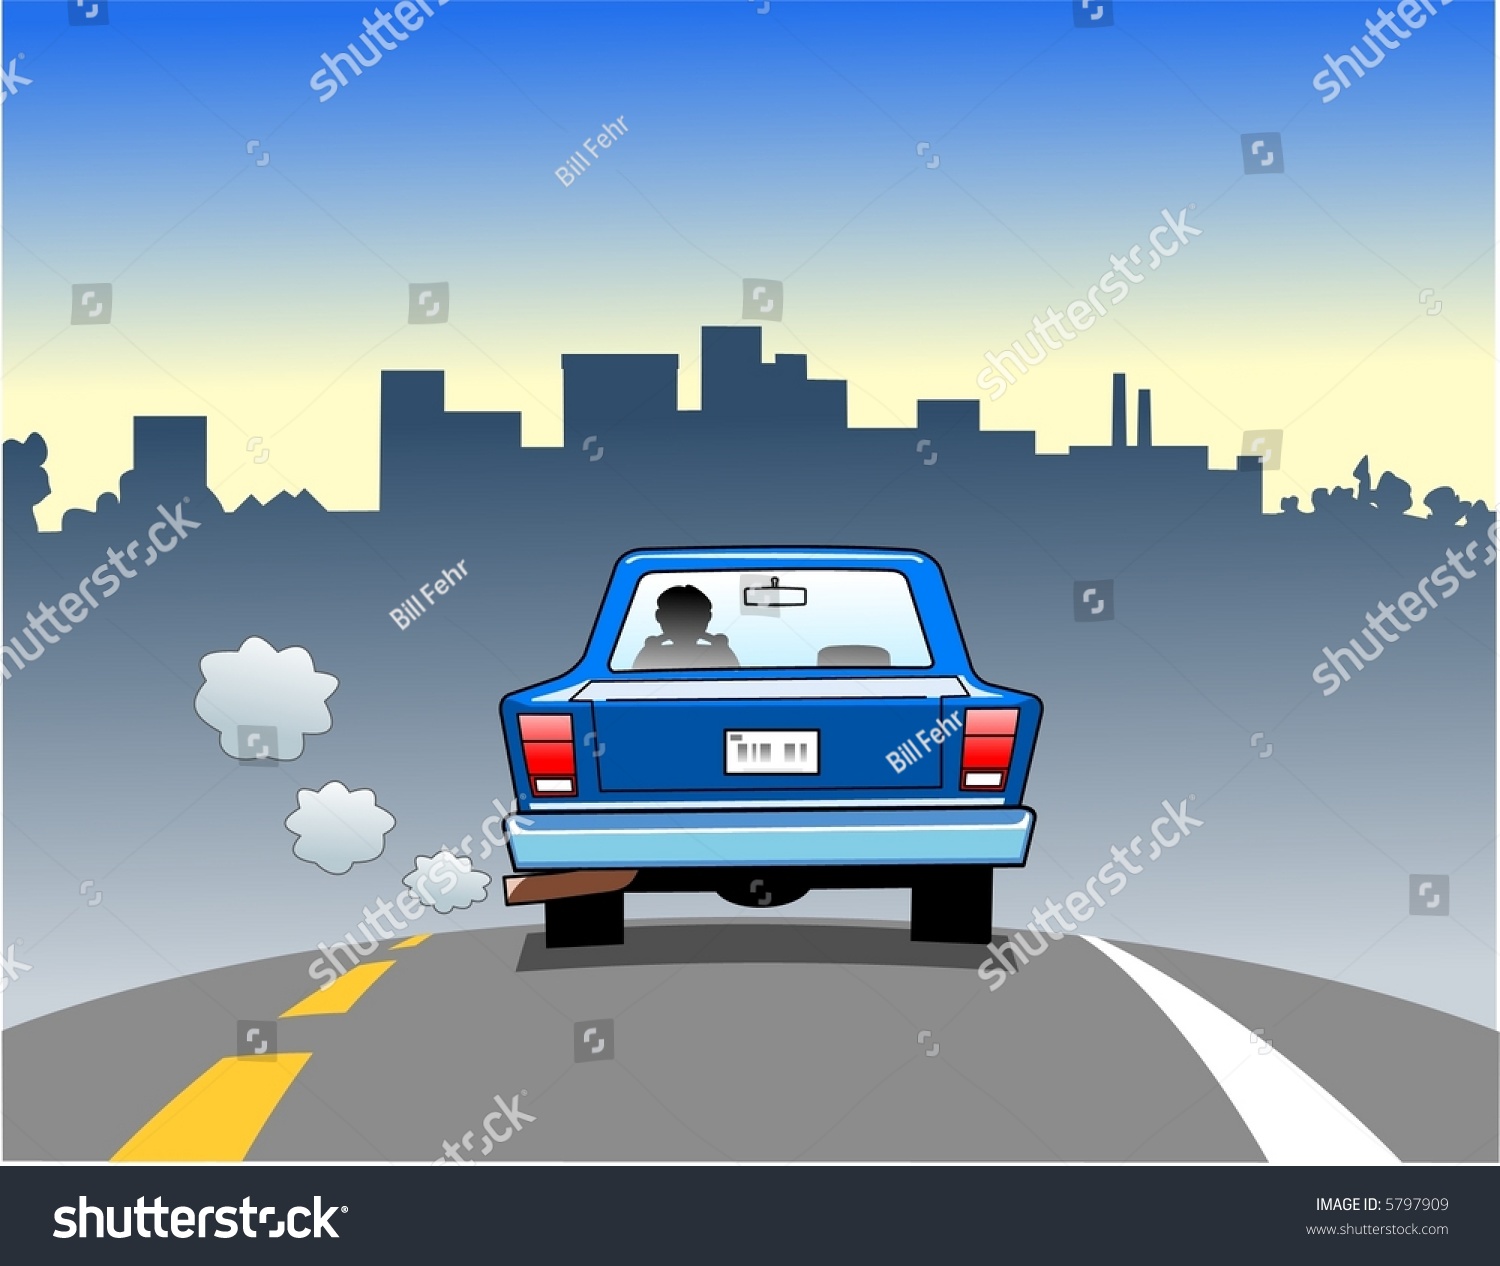 clipart car driving on road - photo #20